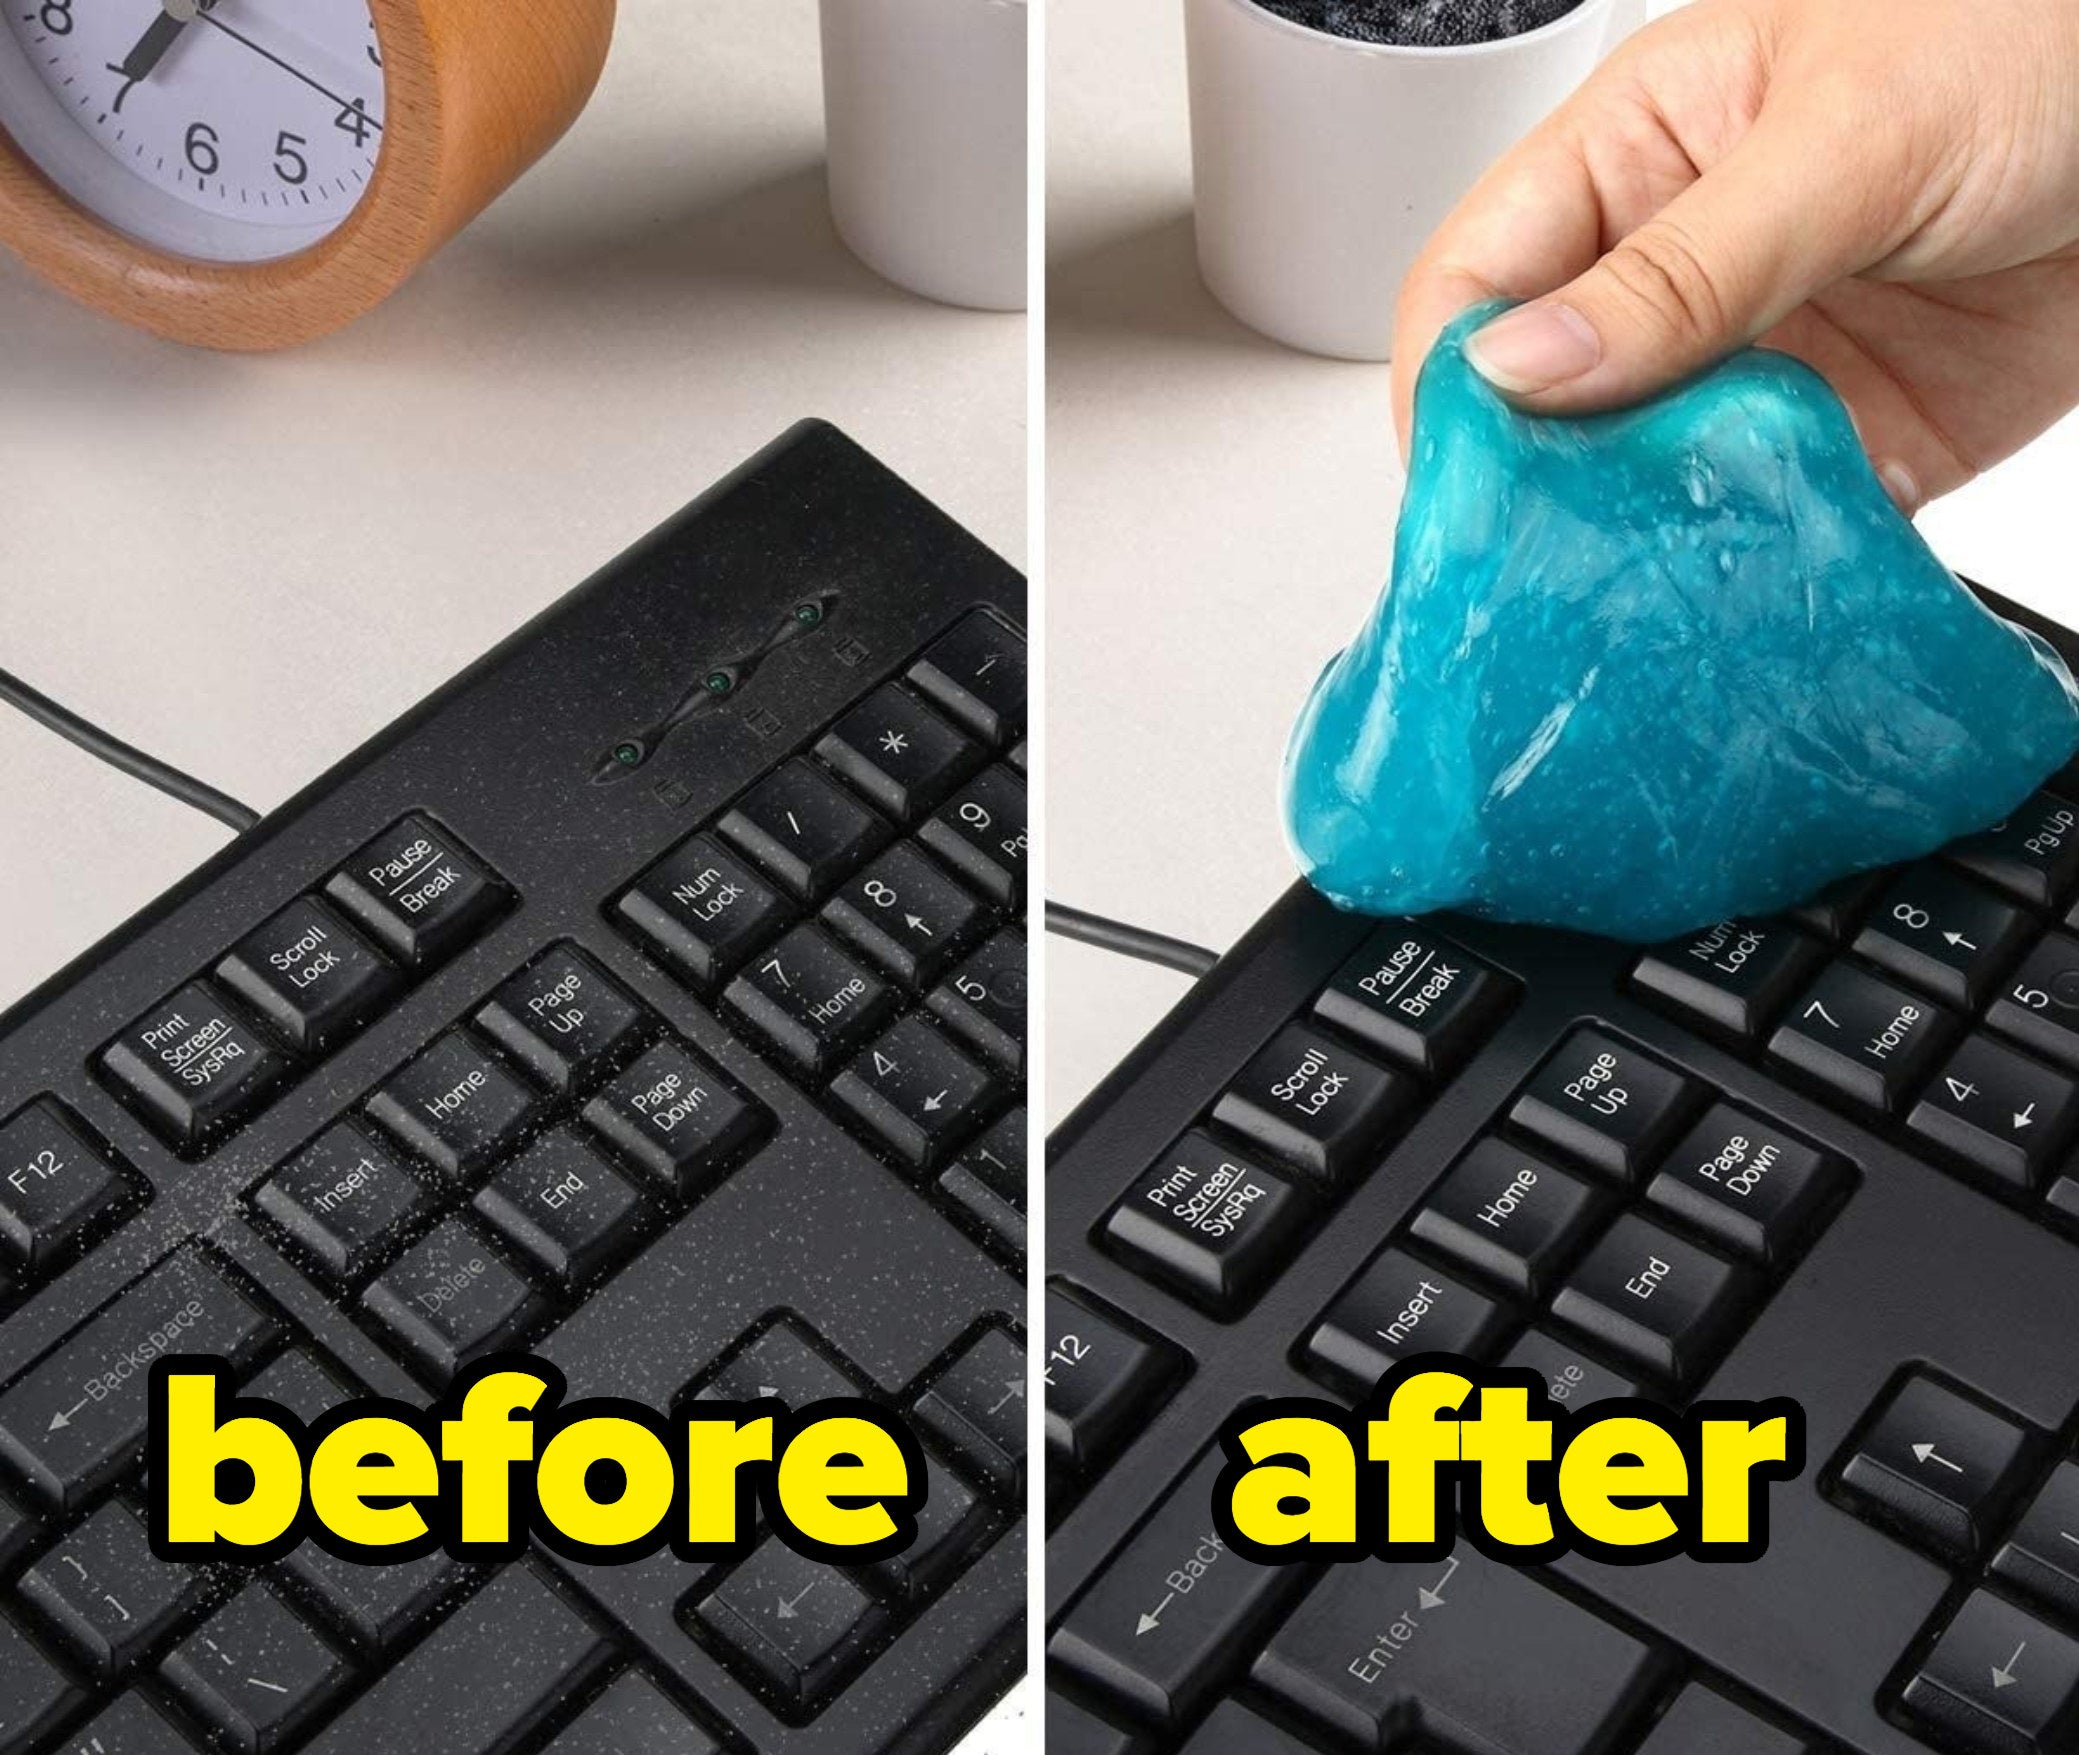 A keyboard before and after being cleaned